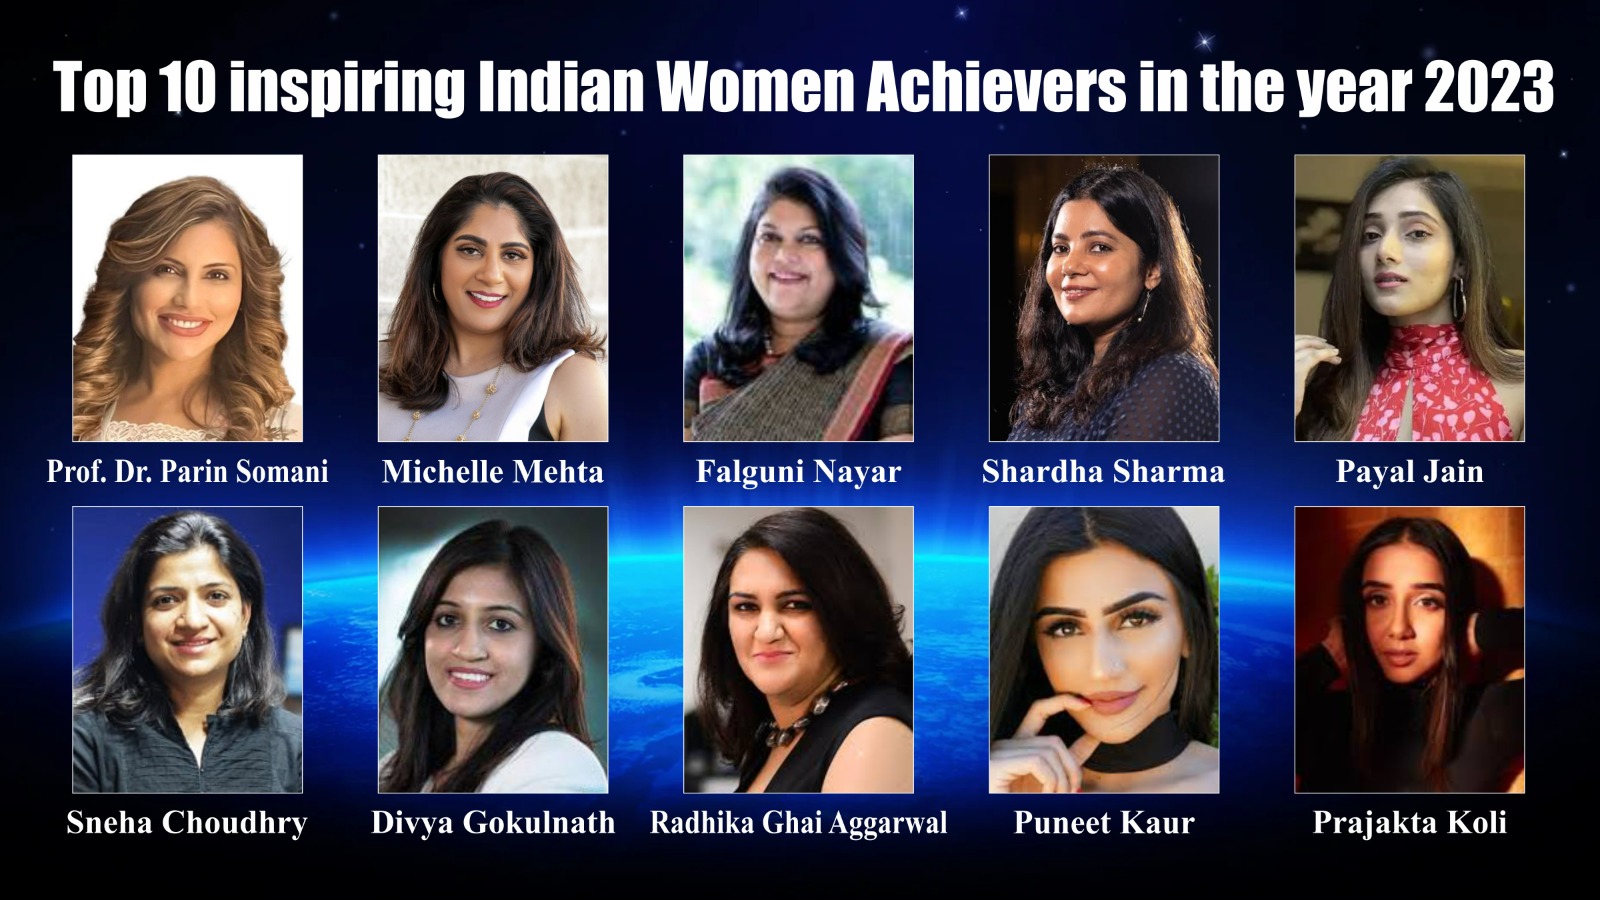 Top 10 inspiring Indian Women Achievers of the year 2023